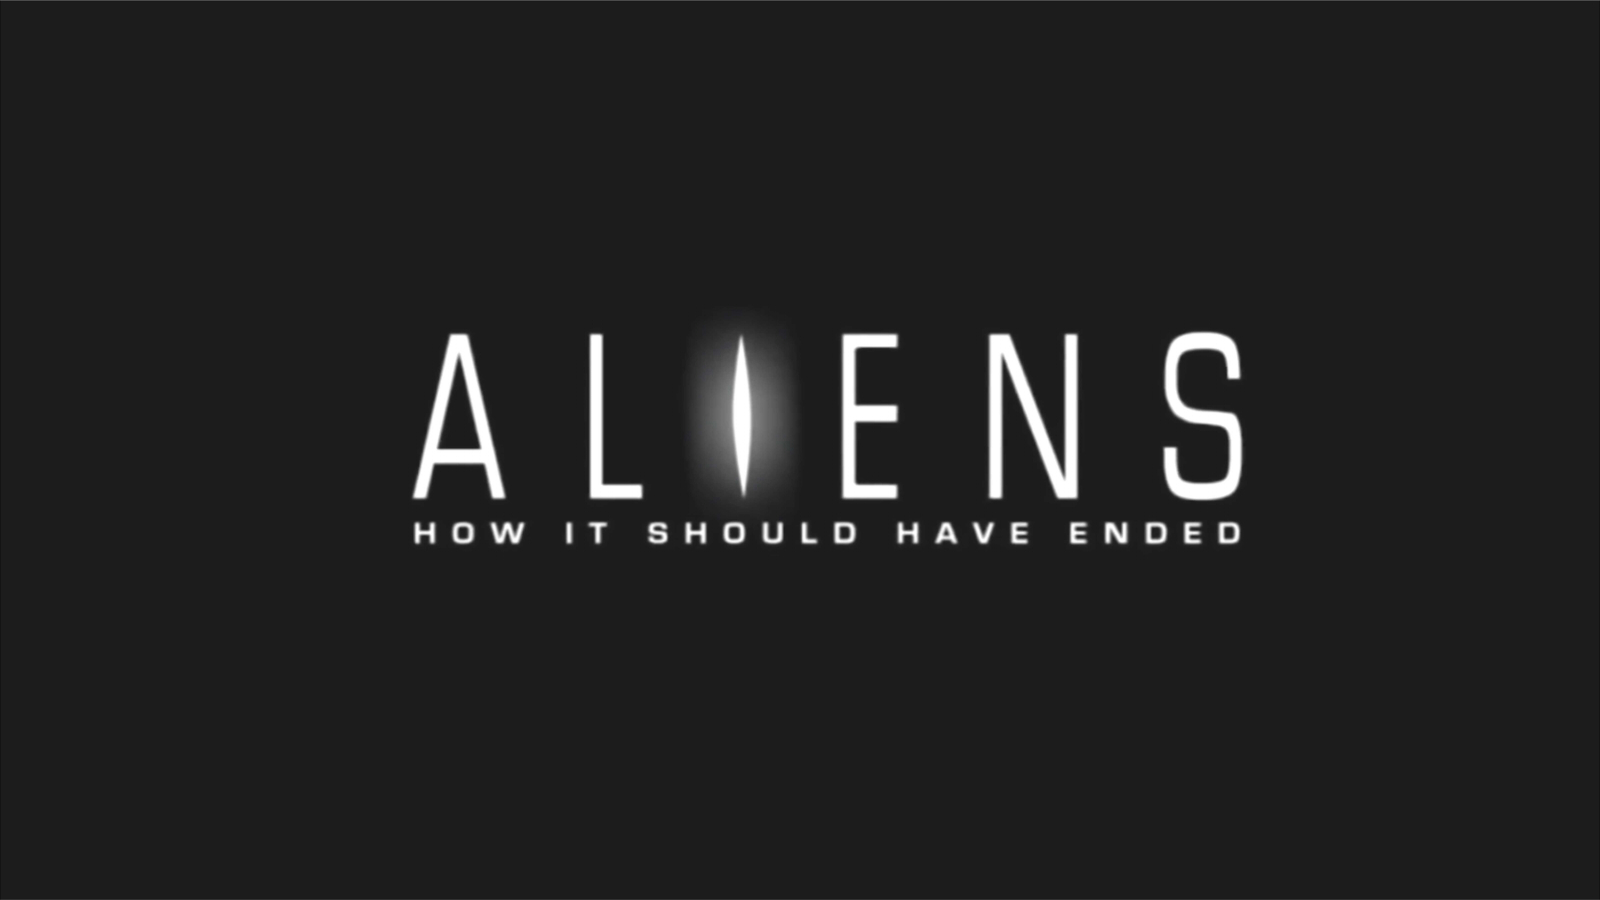 Aliens How it Should Have Ended